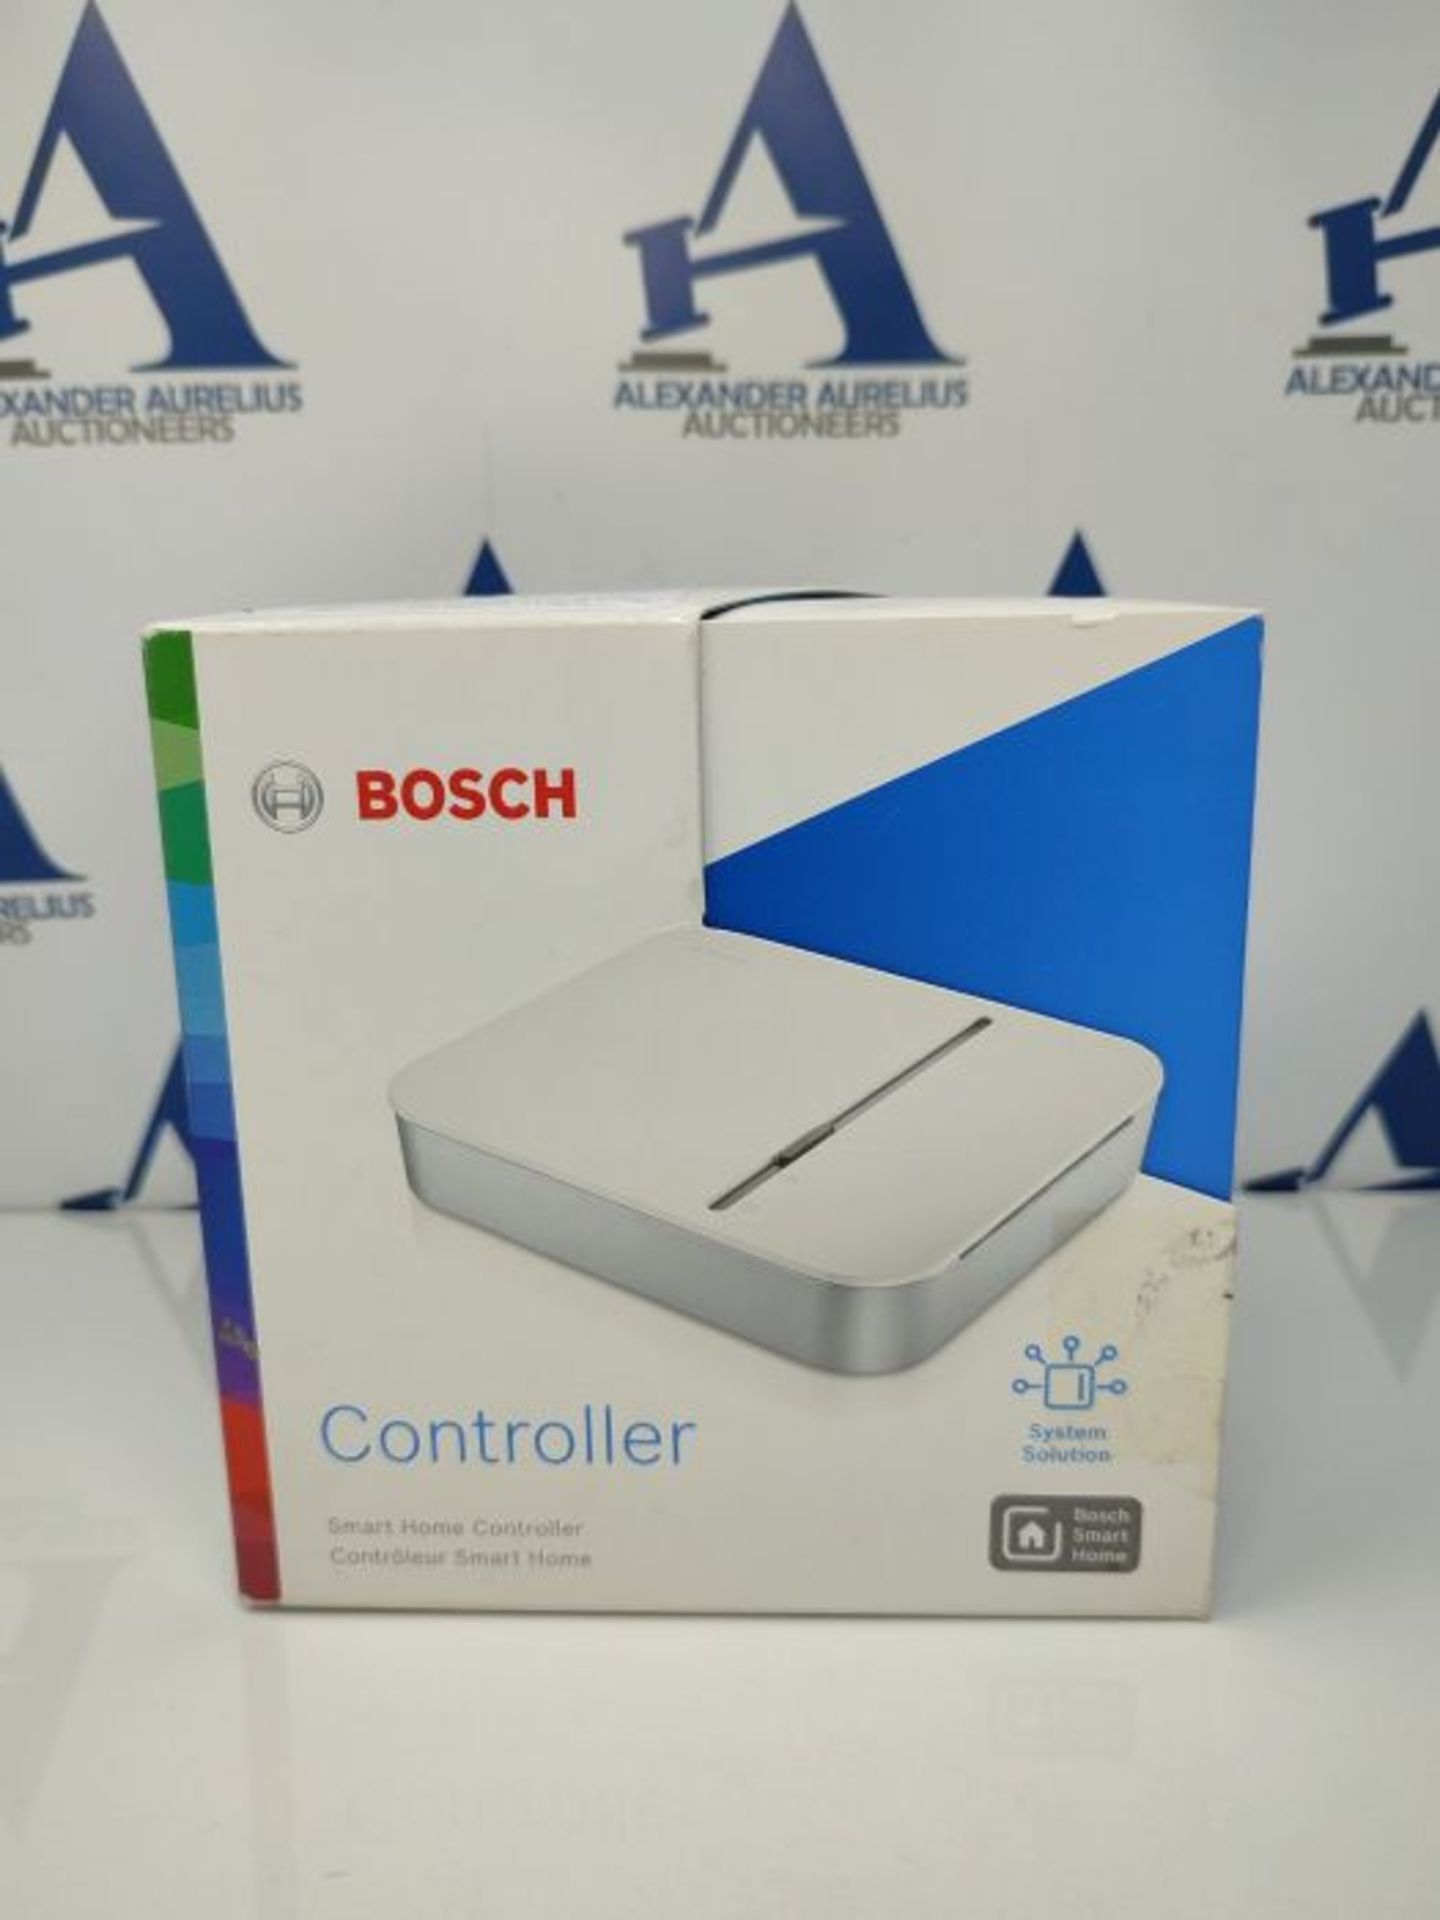 RRP £83.00 Bosch Smart Home controller, hub controlling the Bosch Smart Home system - Image 2 of 3